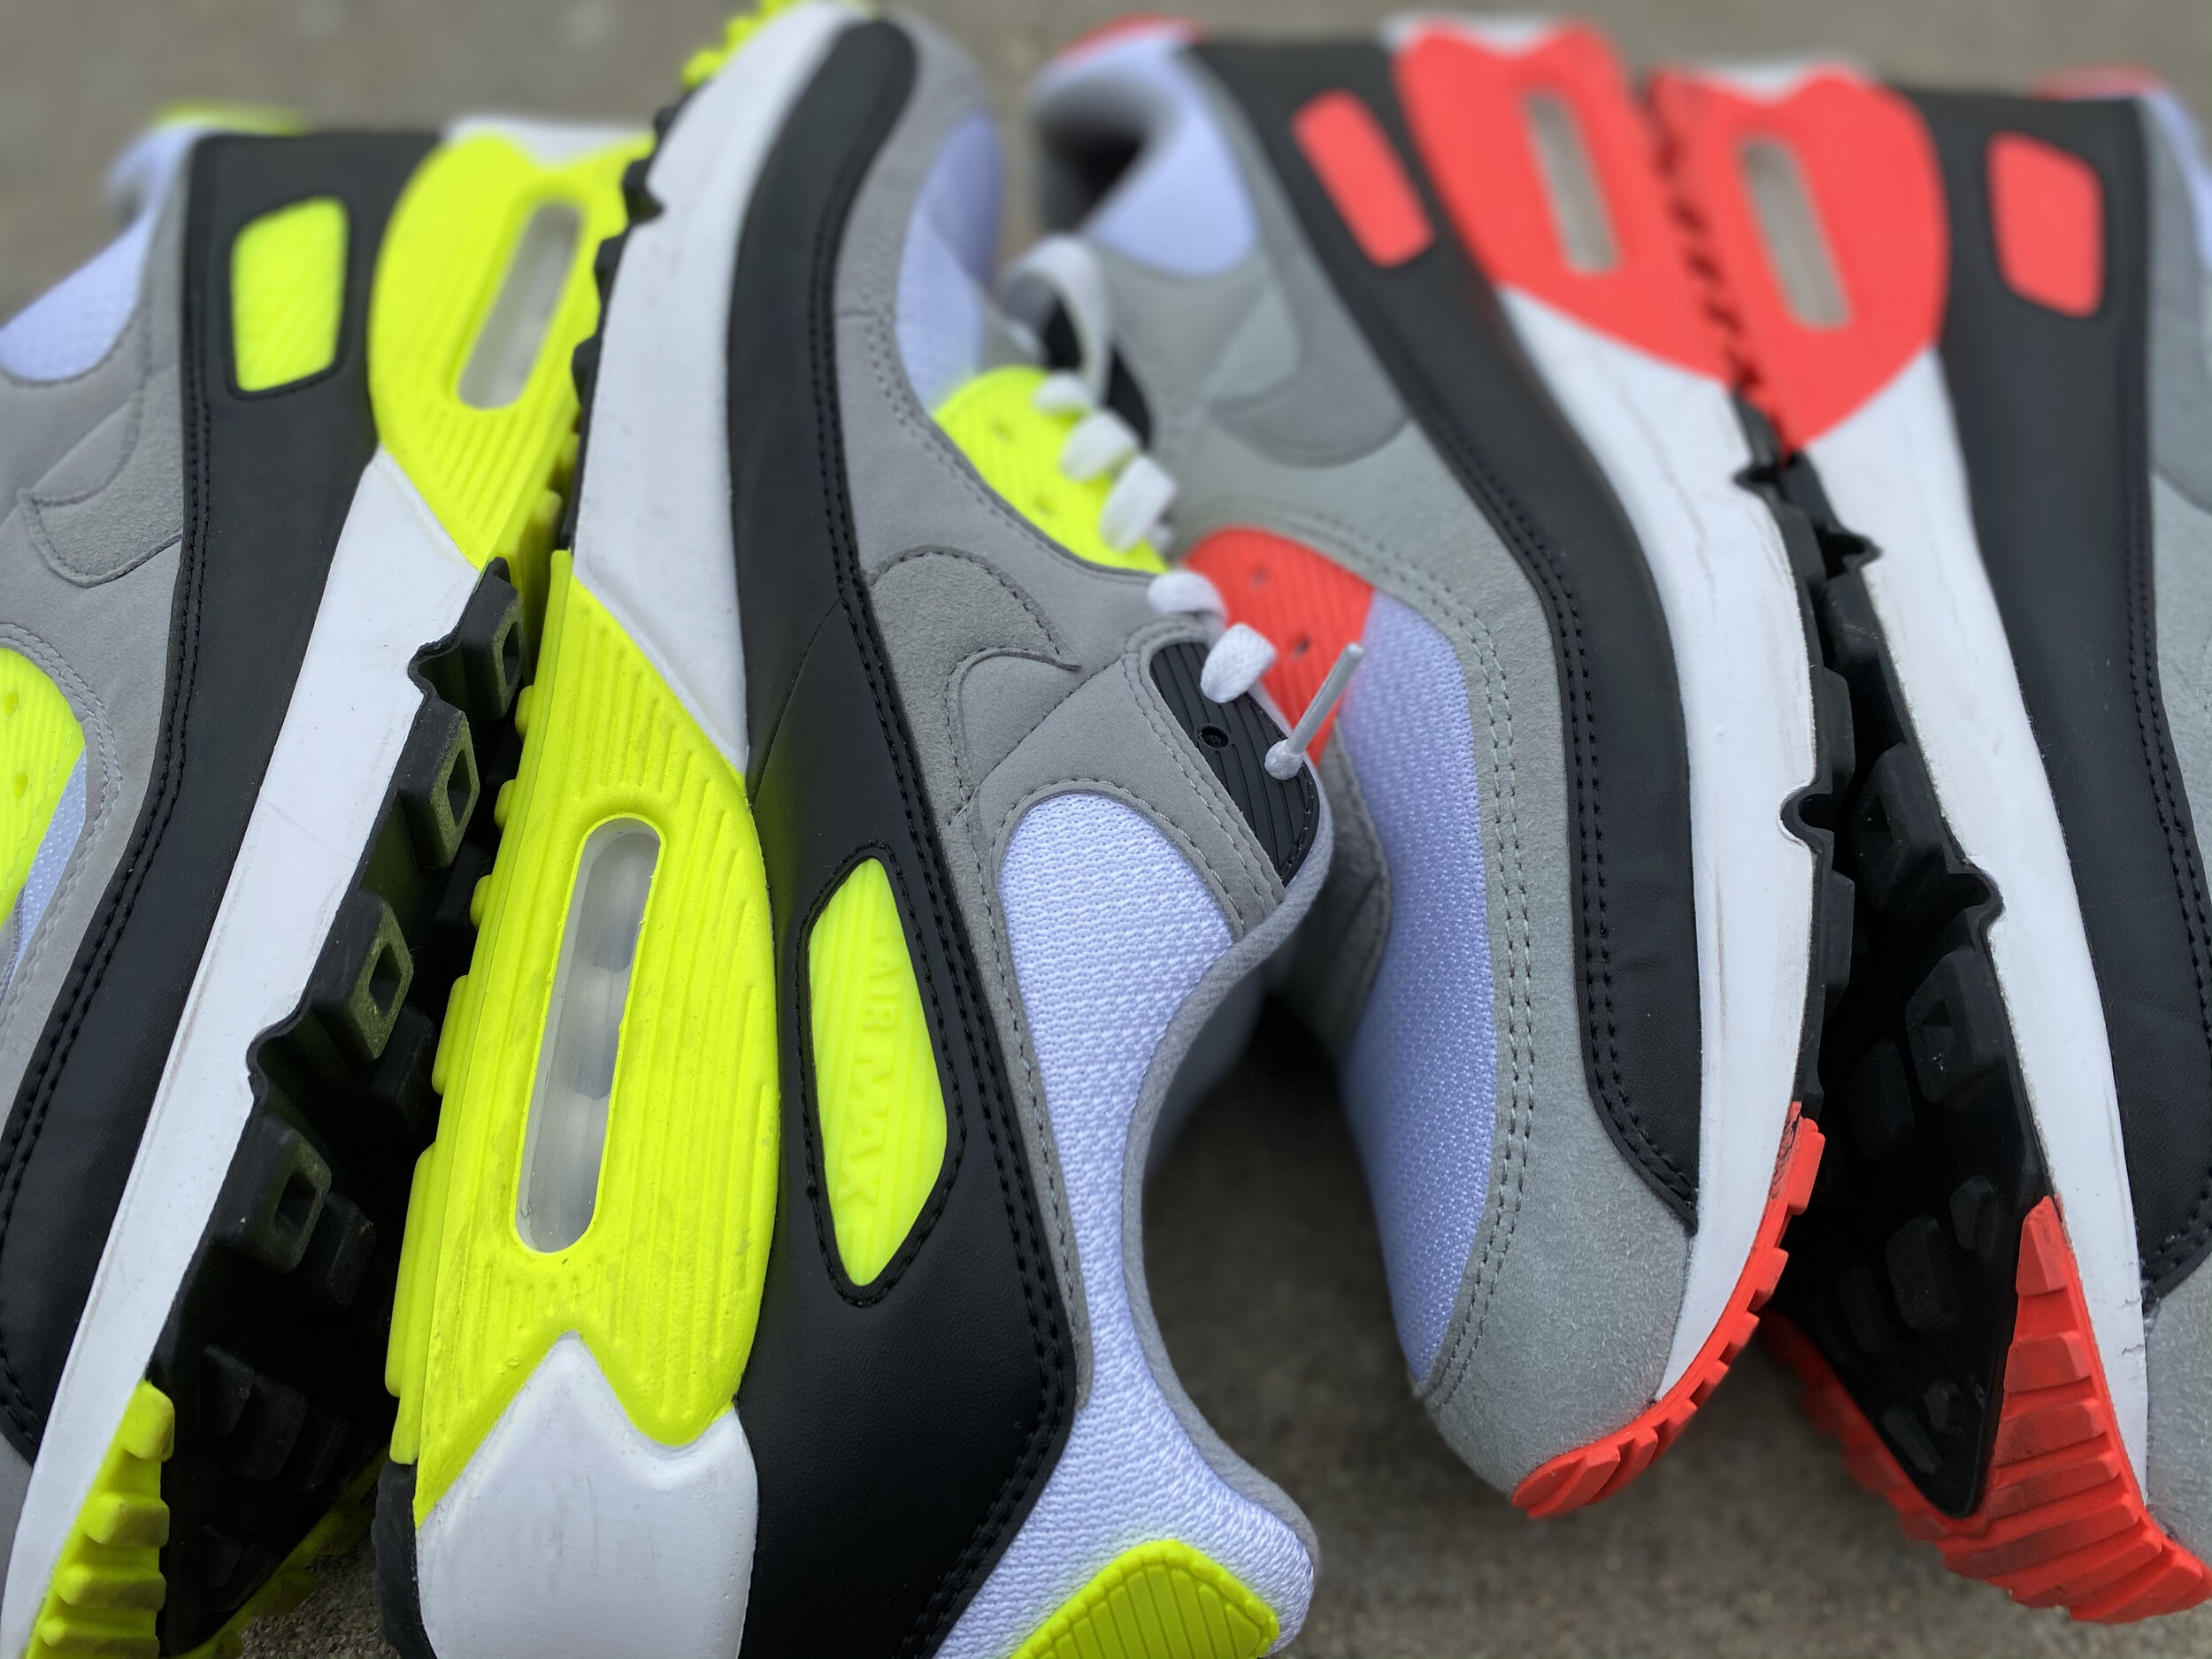 sizing for air max 90